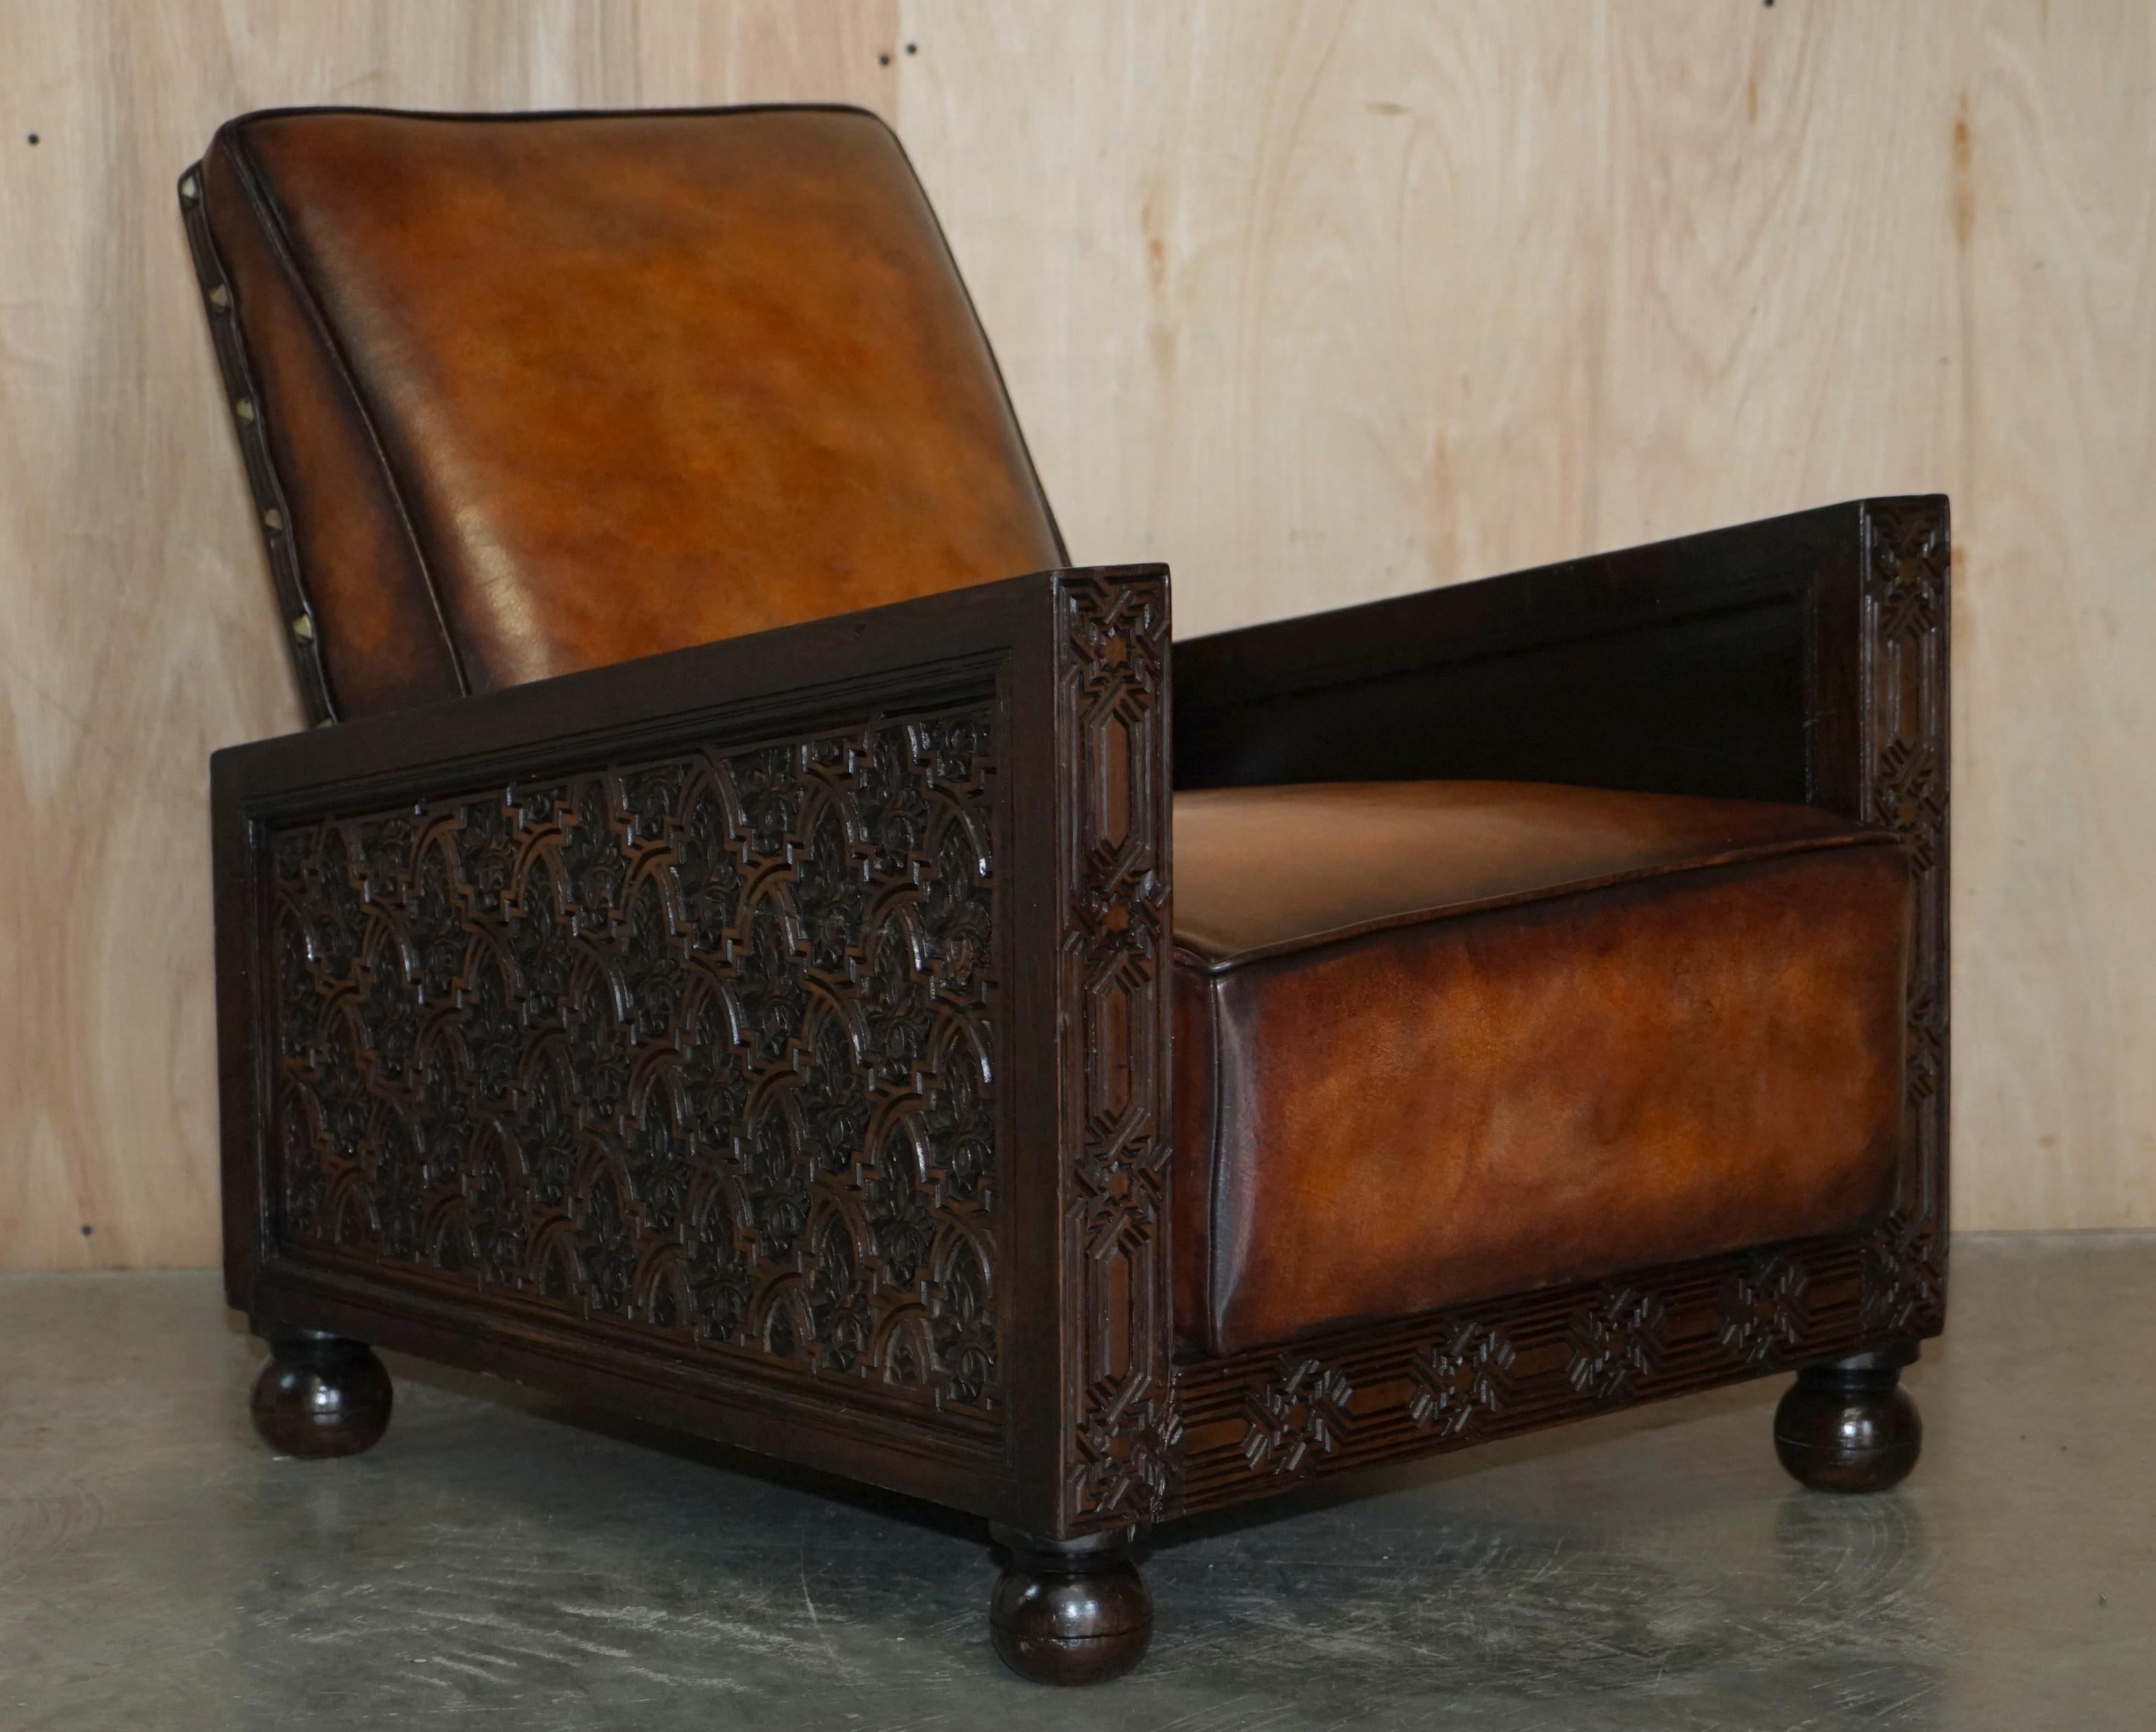 We are delighted to offer for sale this stunning fully restored pair of antique hand dyed Cigar brown leather Art Deco club armchairs with hand carved panels.

An exceptionally good looking well-made and comfortable pair of armchairs, these are